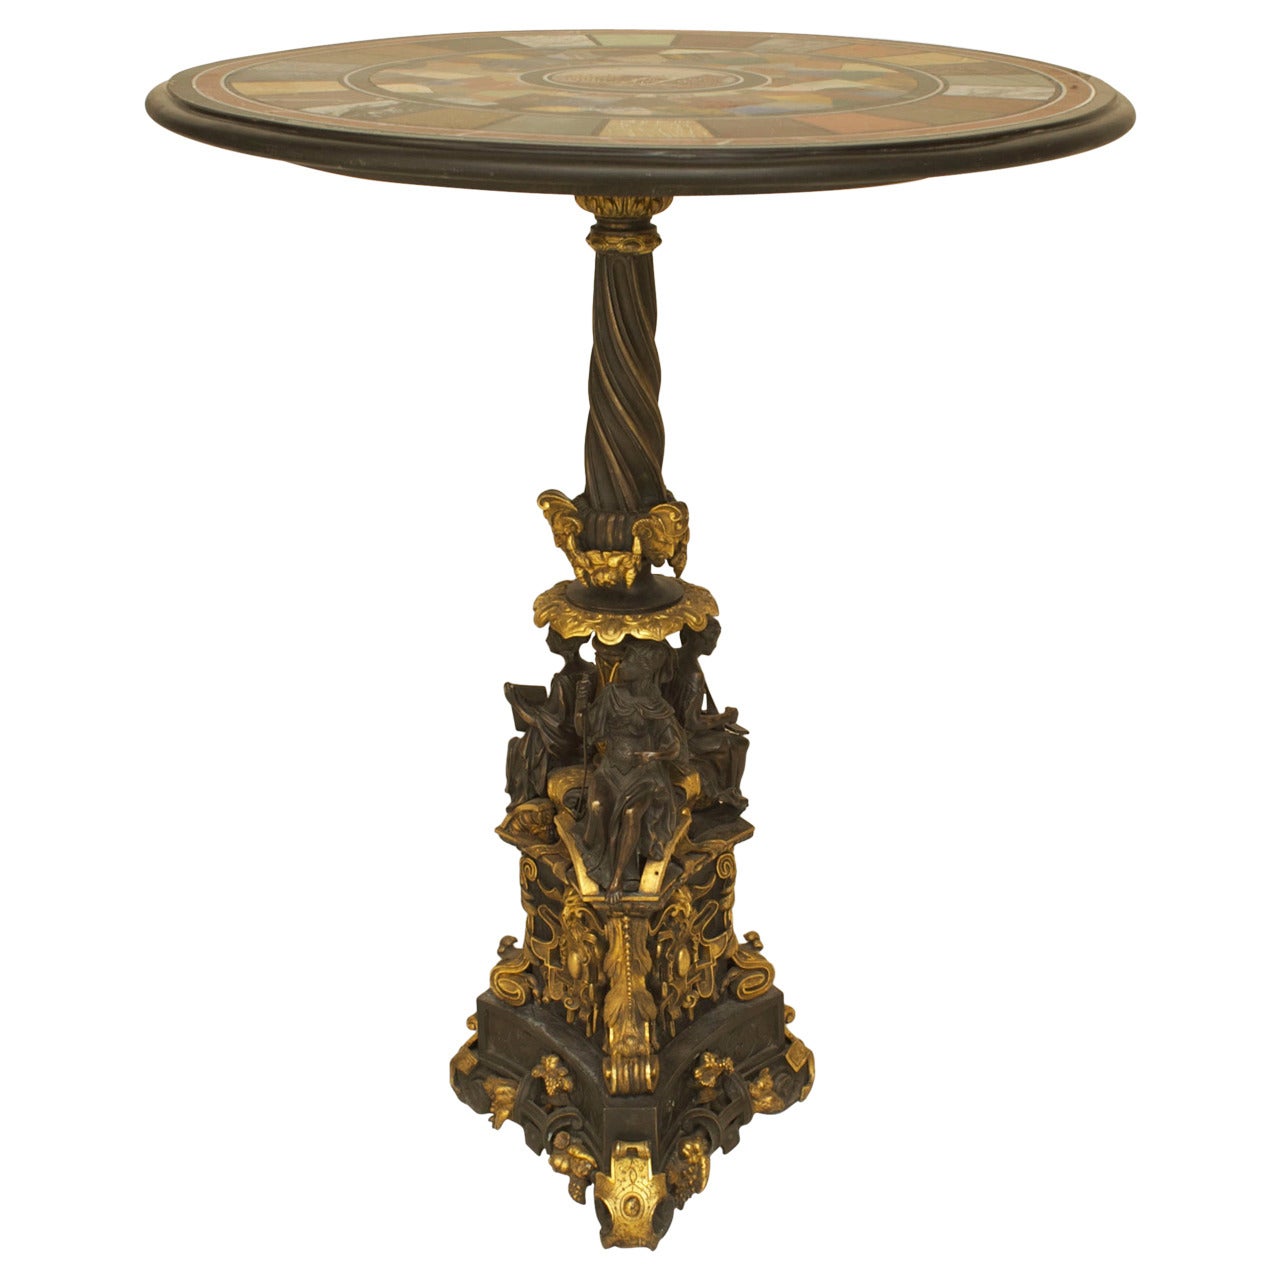 Italian Neo-Classic 19th Century Grand Tour Round Marble Mosaic Table For Sale